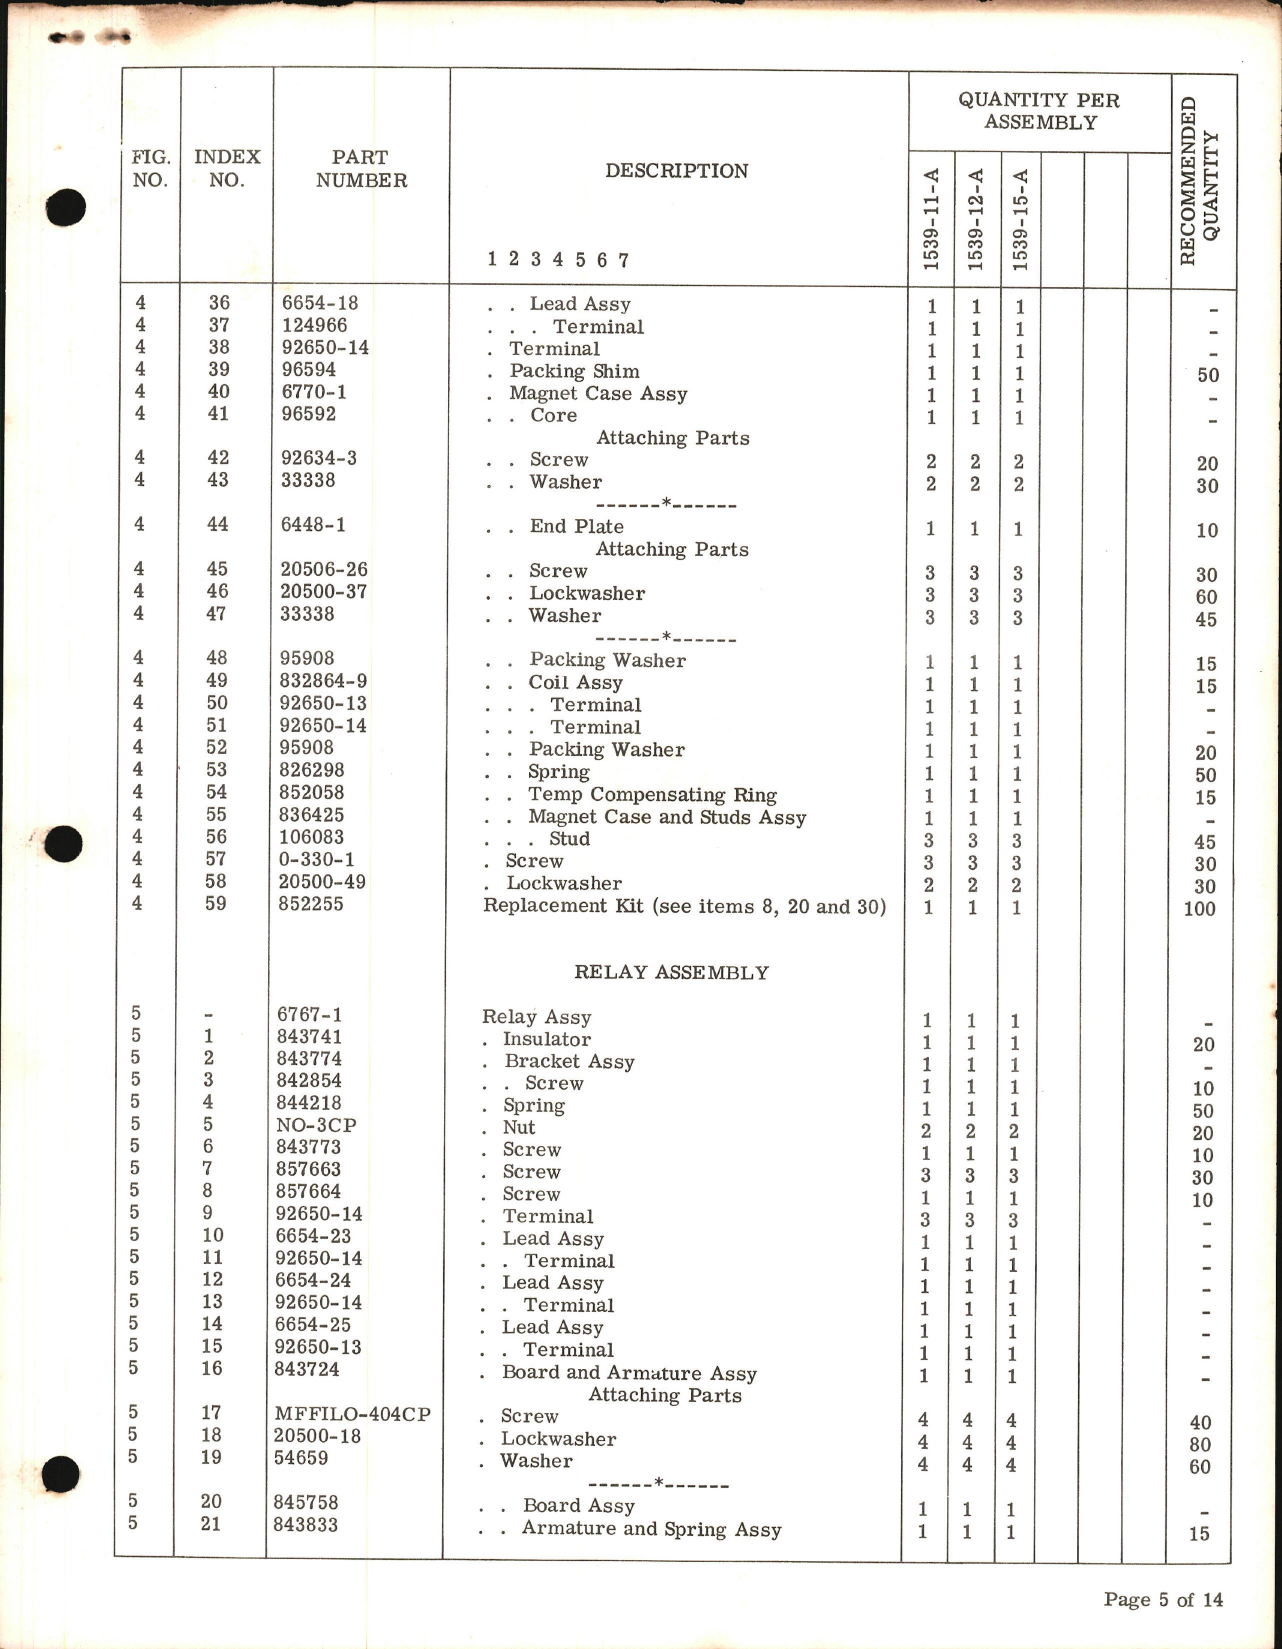 Sample page 5 from AirCorps Library document: Service Parts List for Generator Control Panel 1539-11, -12, and -15